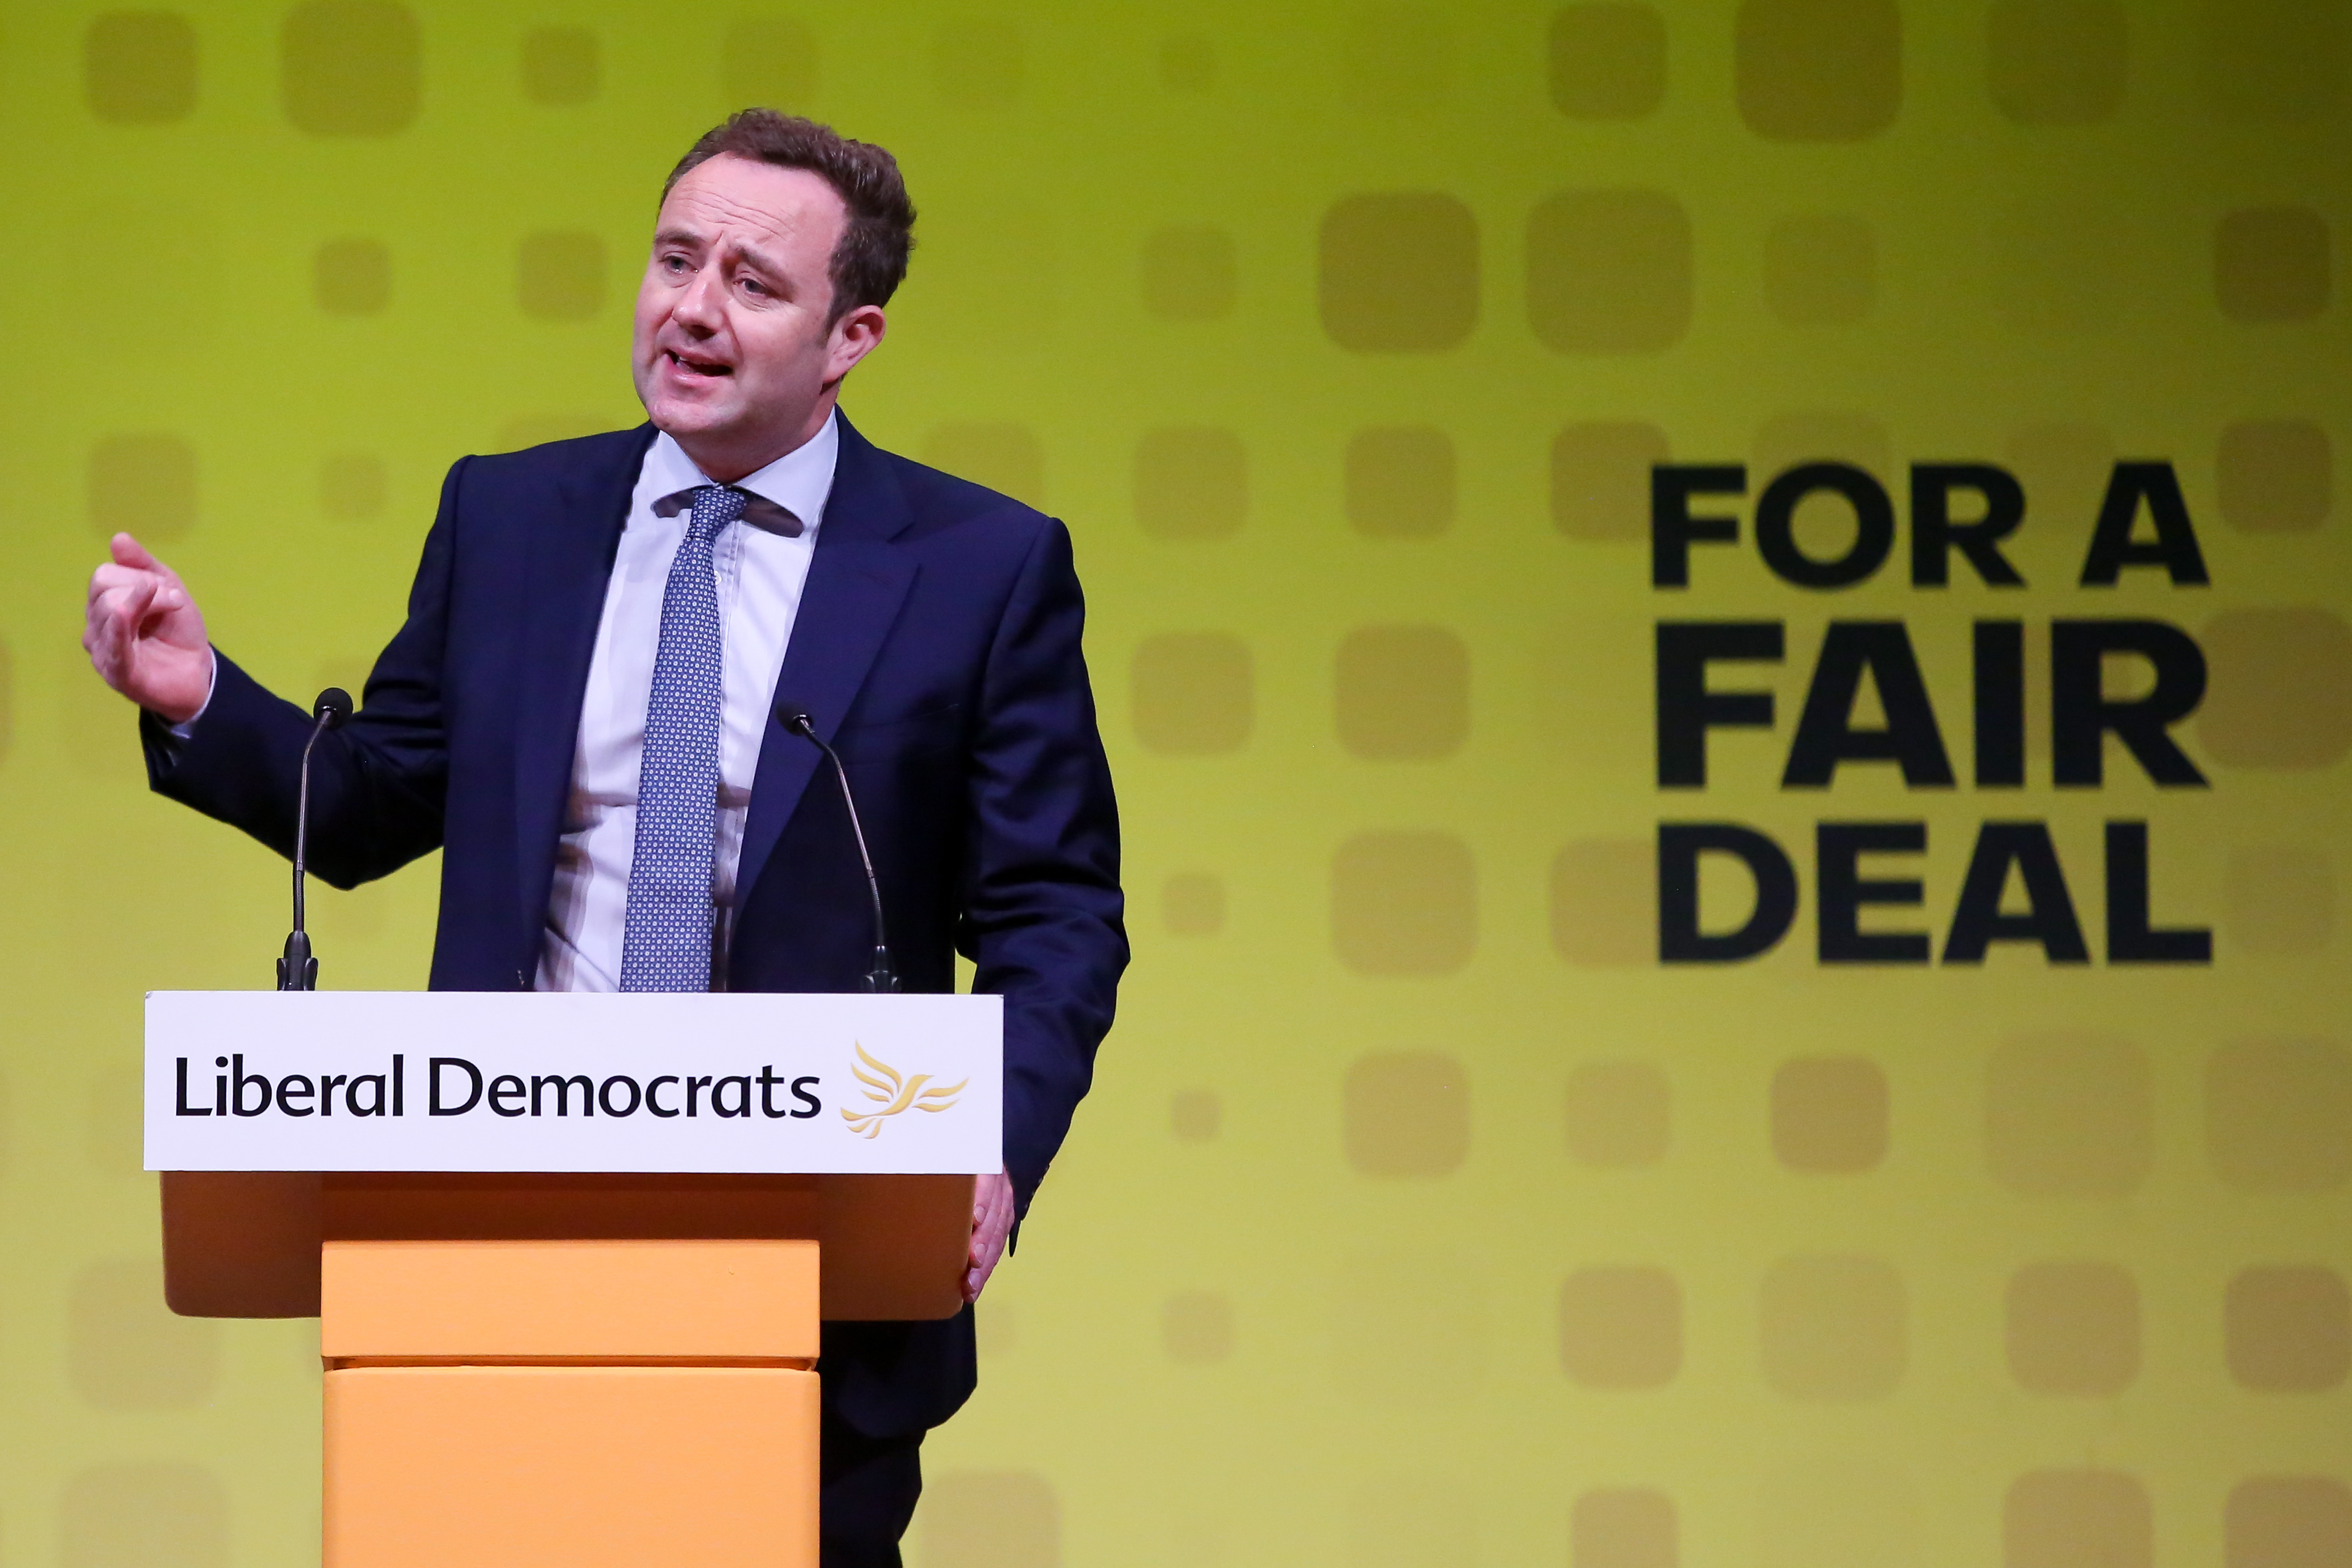 Danny speaking at Lib Dem party conference